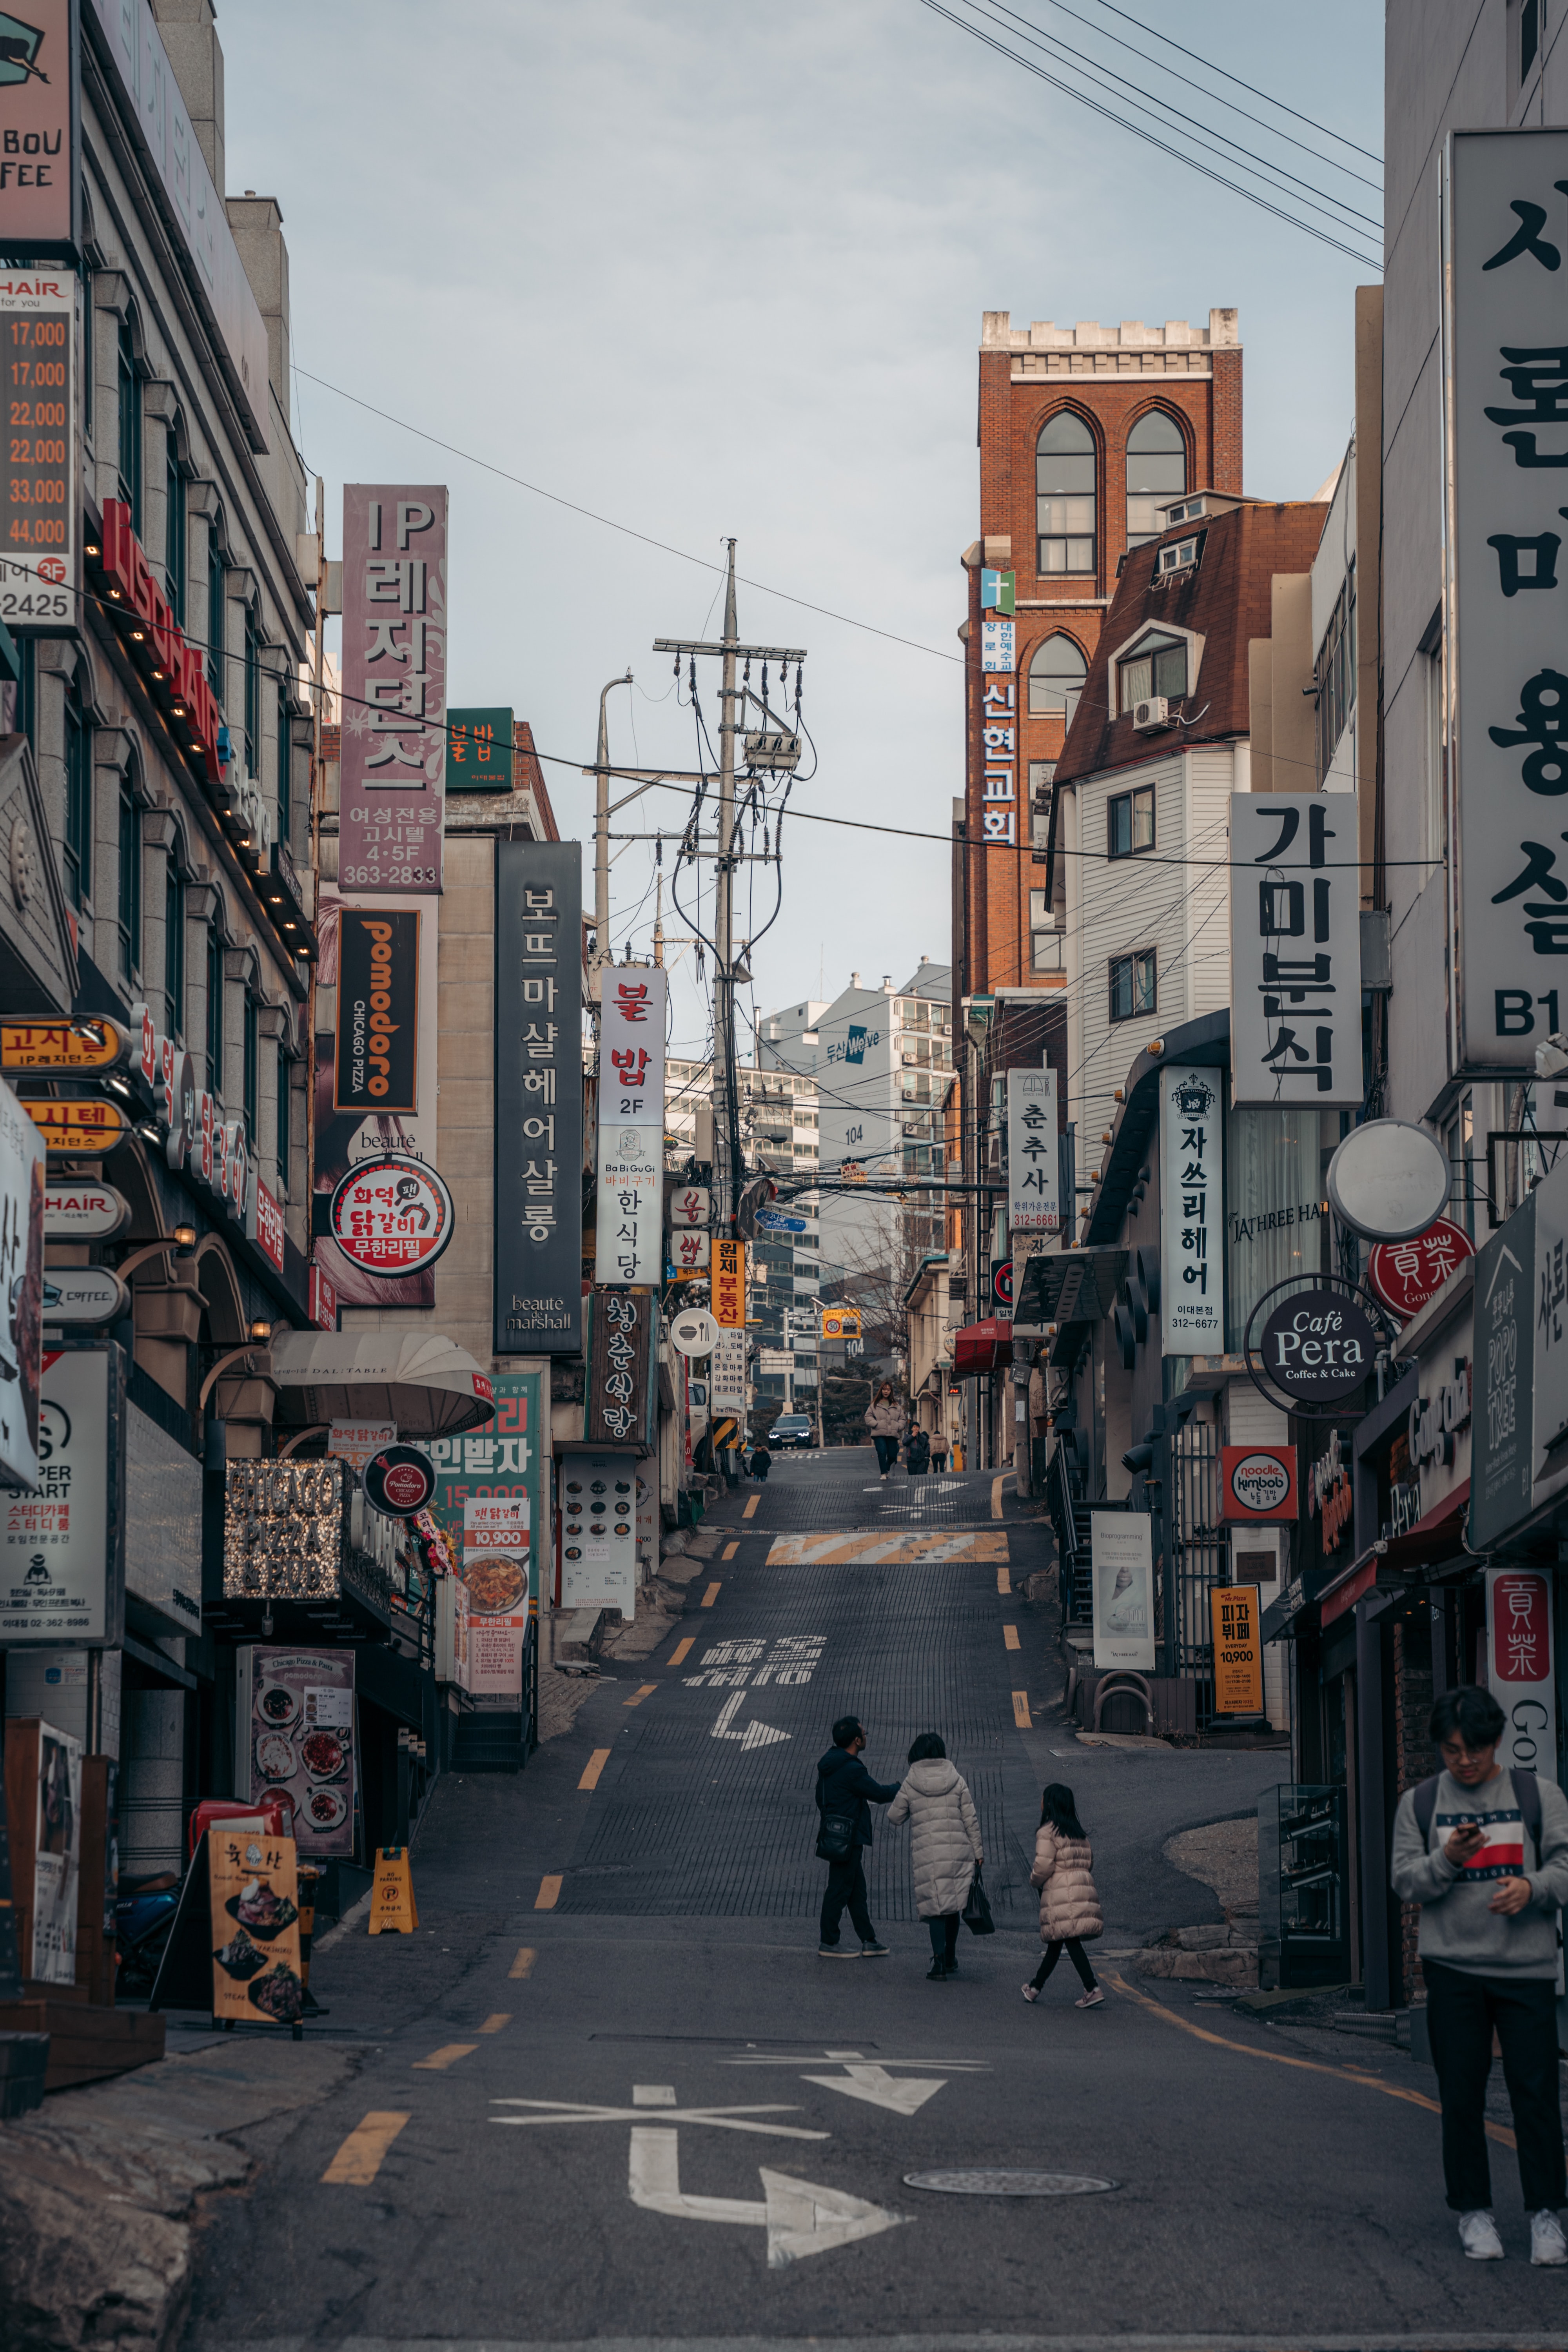   Photo by Ming Han Low on Unsplash